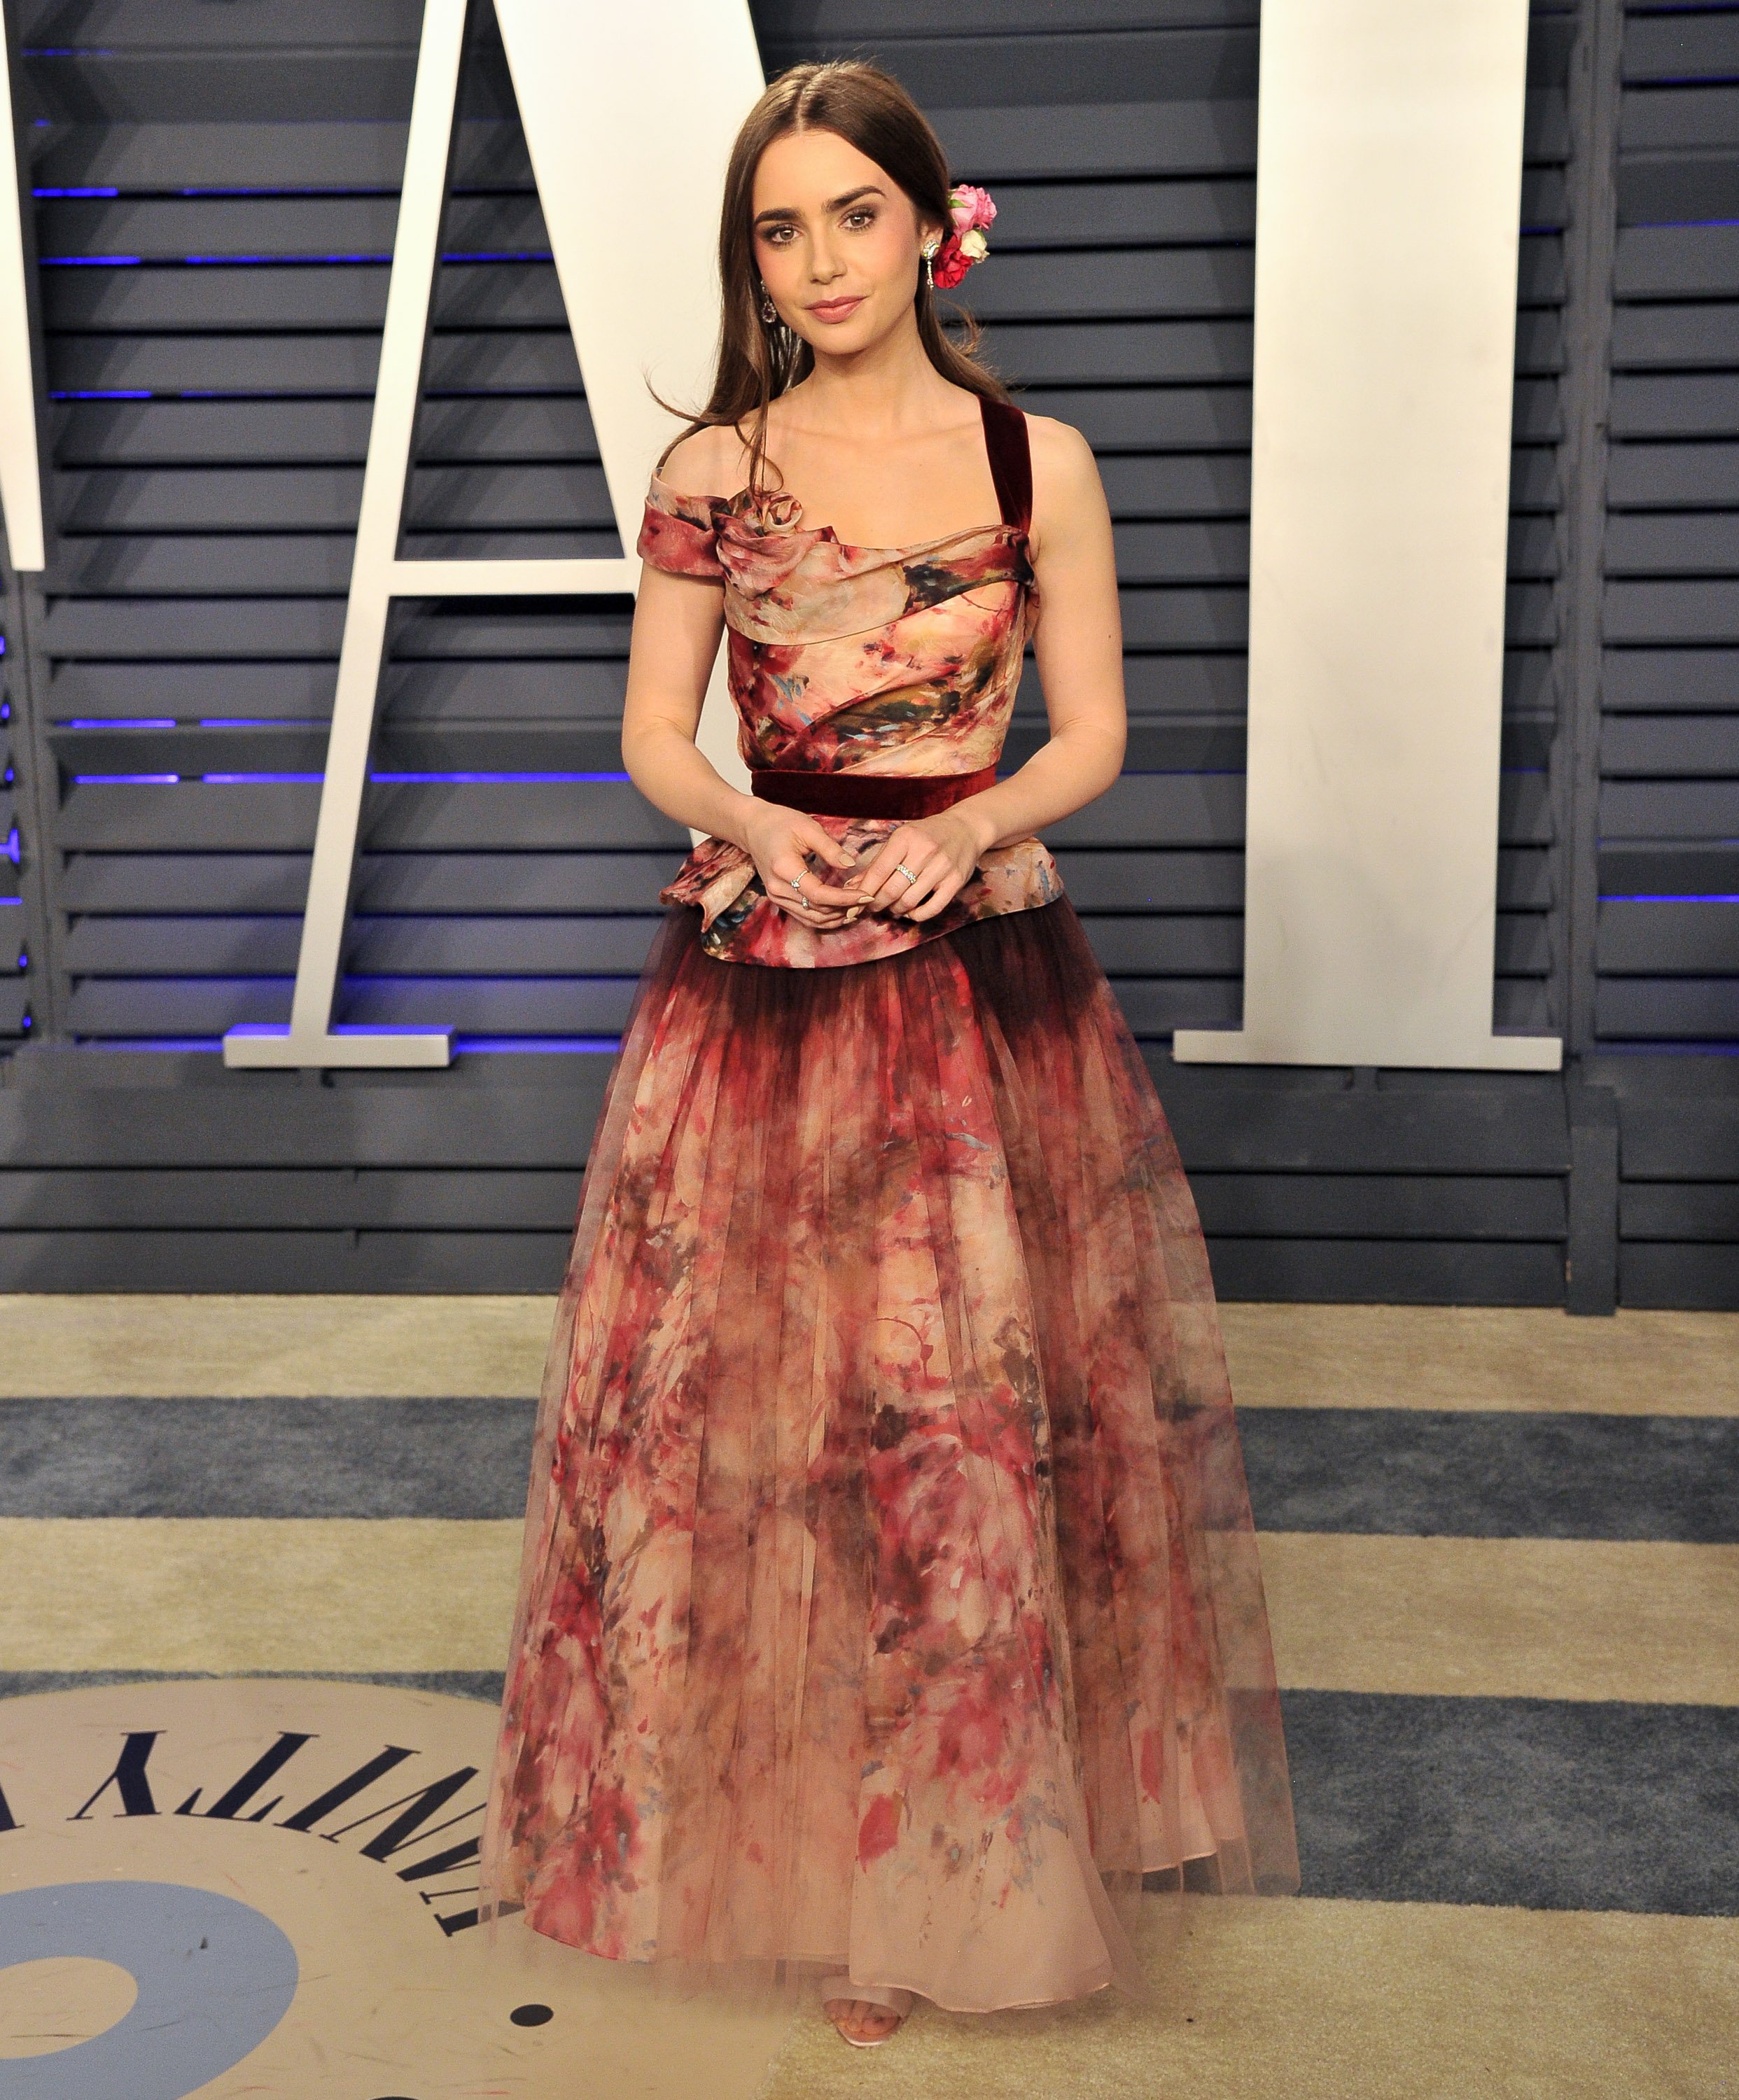 Lily Collins attends the 2019 Vanity Fair Oscar Party on February 24, 2019 in Beverly Hills, California. | Photo: Getty Images